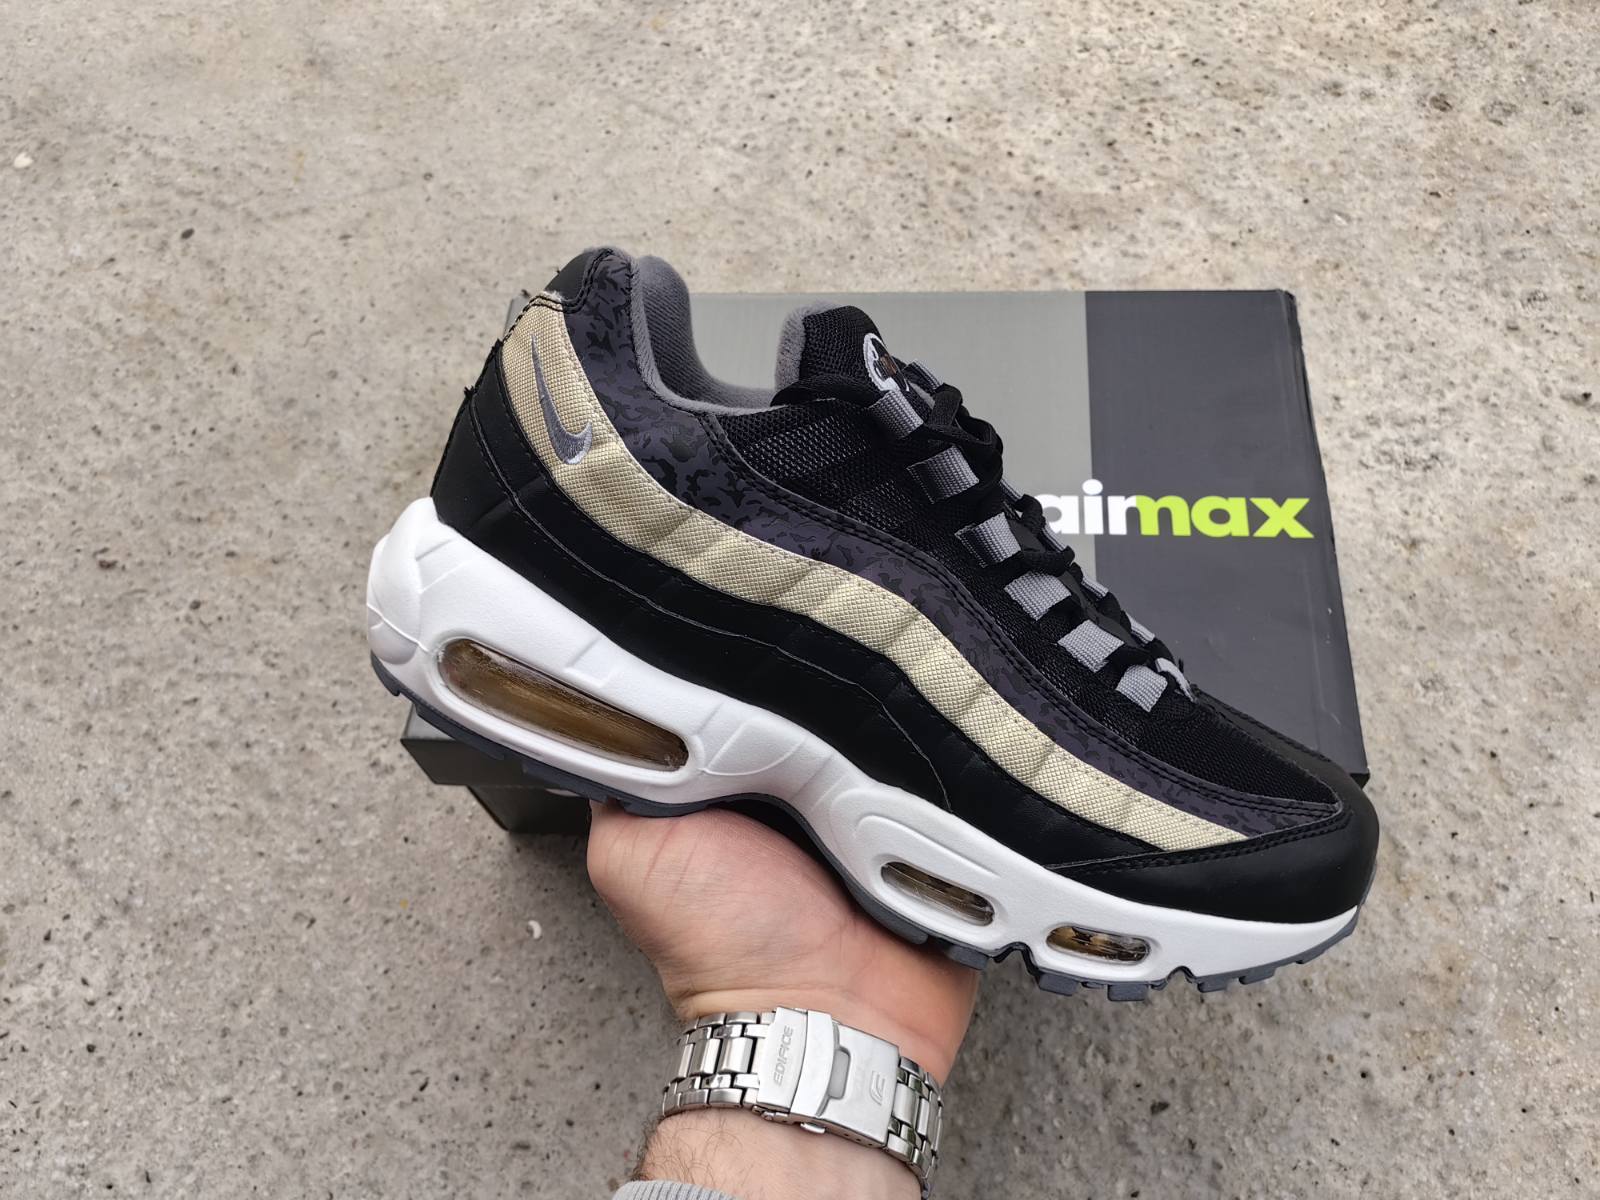 Nike Air Max 95 Reflective Iredscent Camo